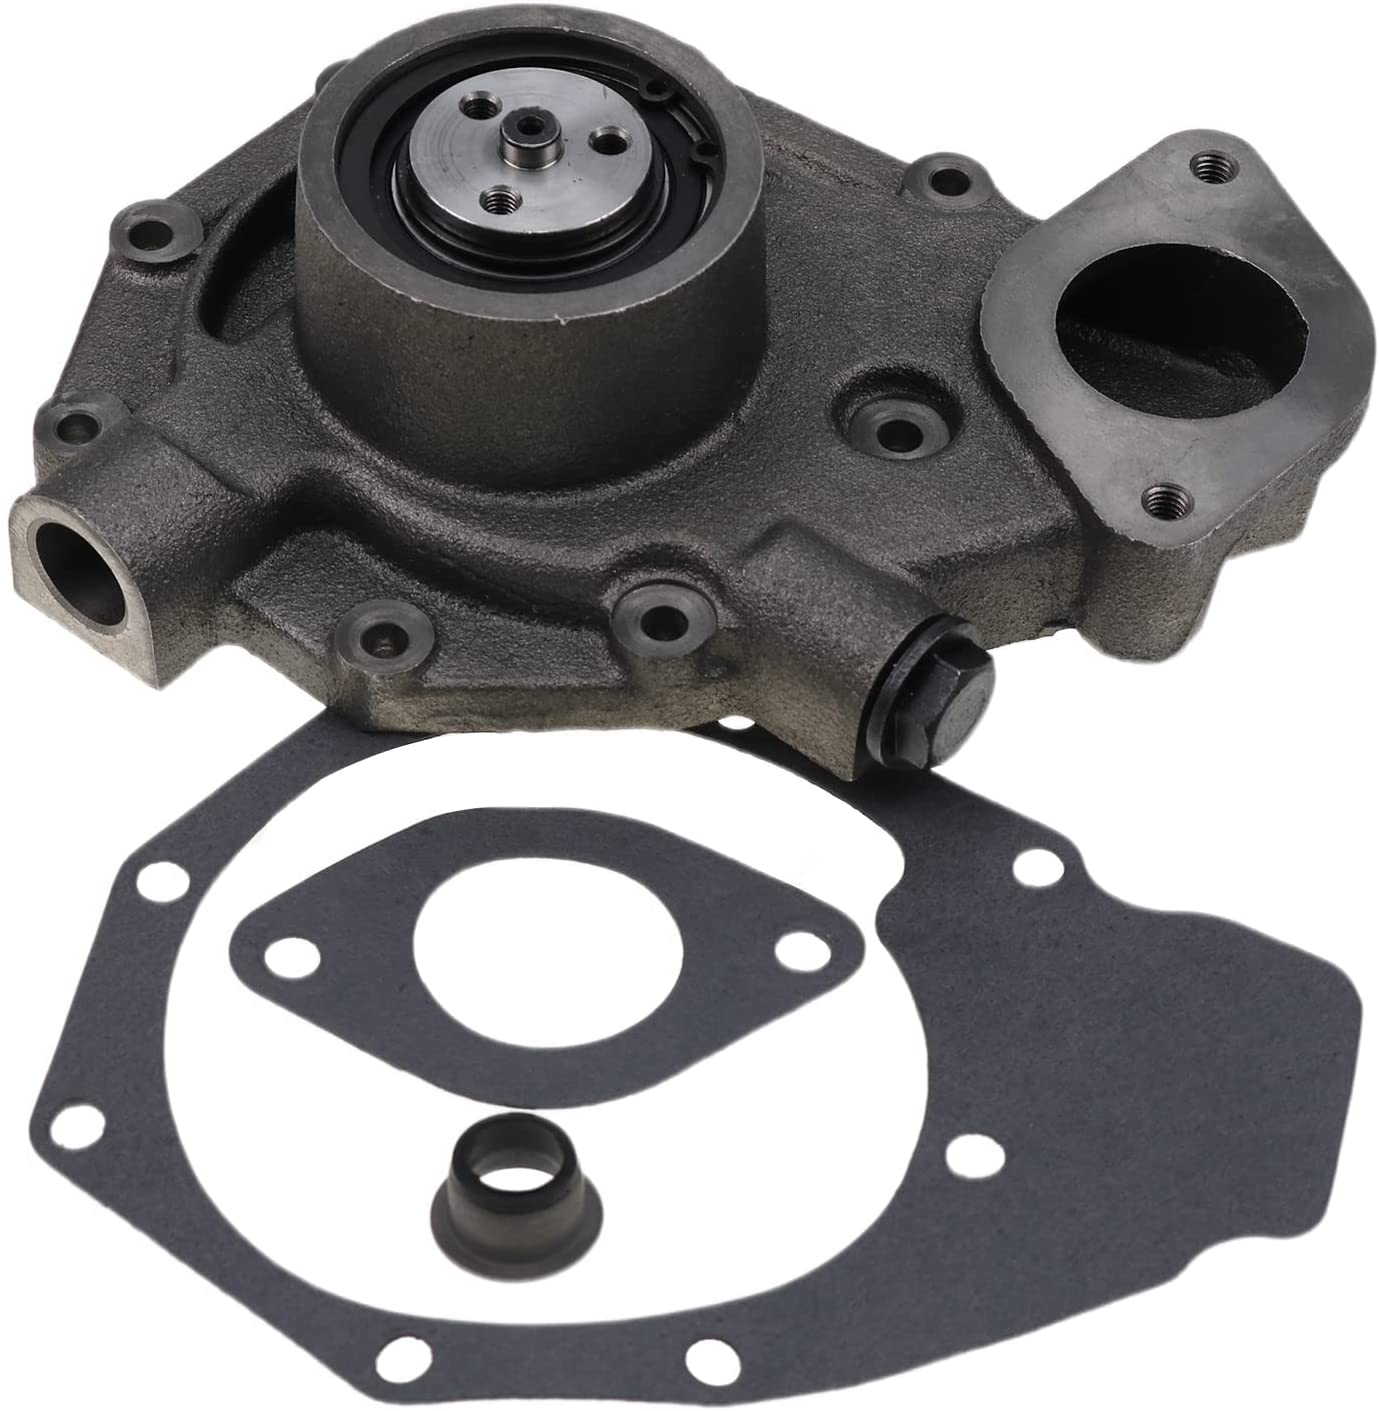 Water Pump RE505981 R503509 with Gaskets for John Deere 310E 310G 310J 310K 310SJ 310SK 315SJ 315SK 325J 325K 325SK 410G 410J 410K 710D 710G 710J Backhoe Loader - KUDUPARTS